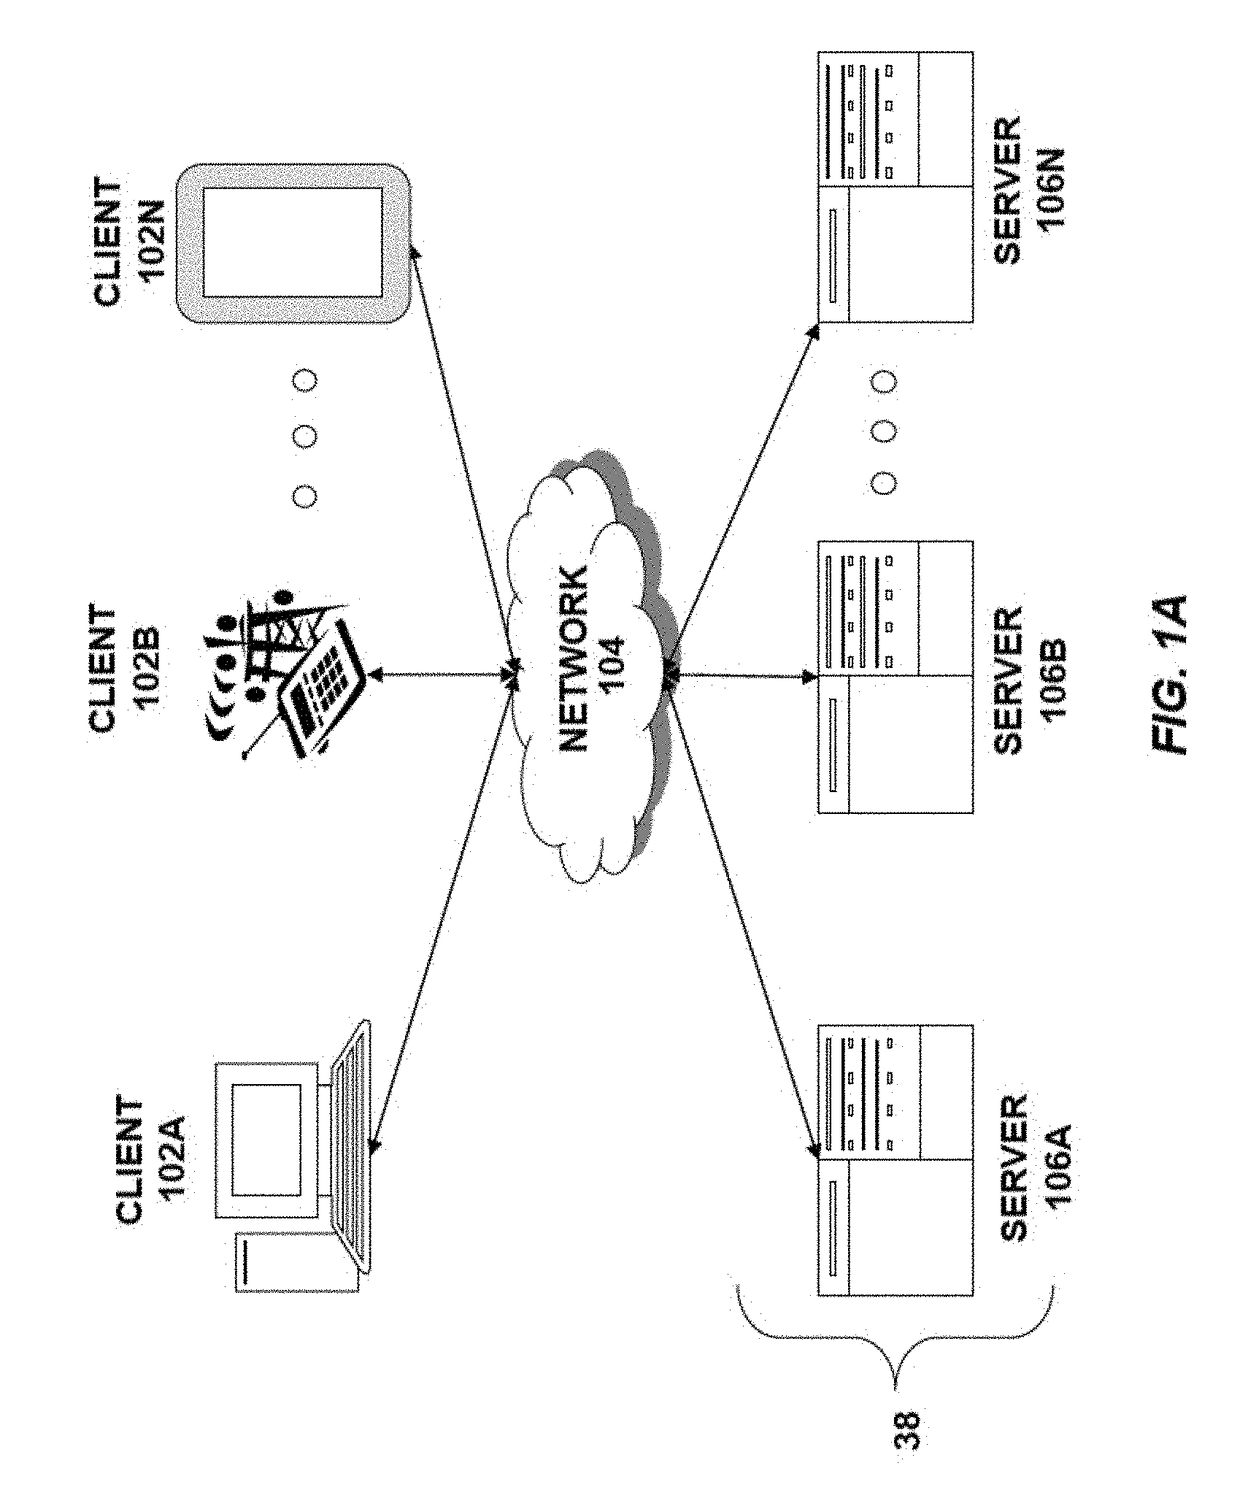 System and apparatus for detecting forgery features on identification documents